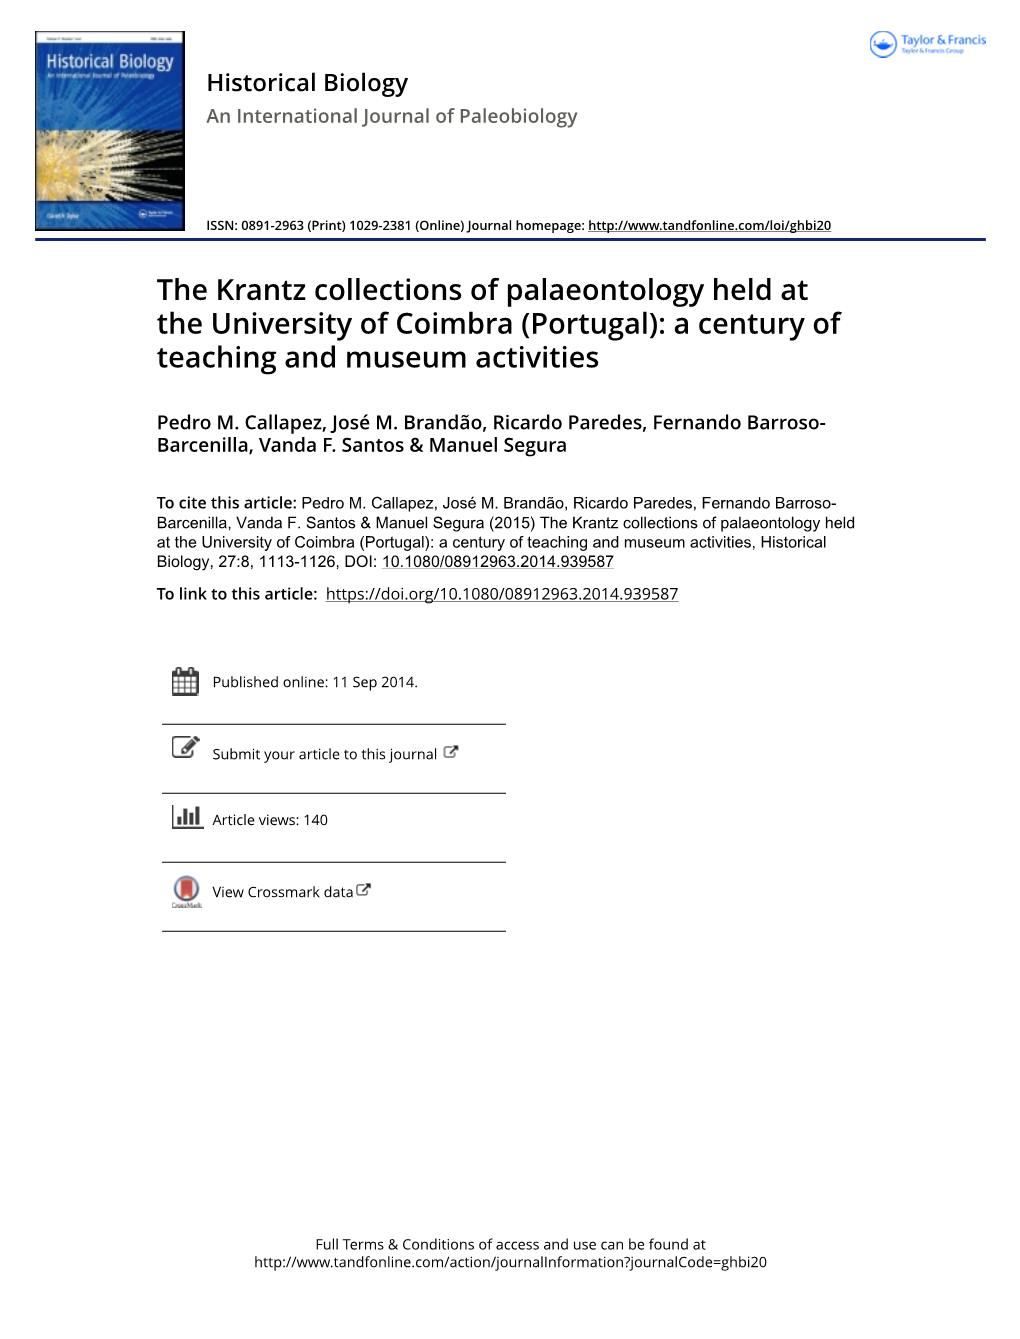 Portugal): a Century of Teaching and Museum Activities